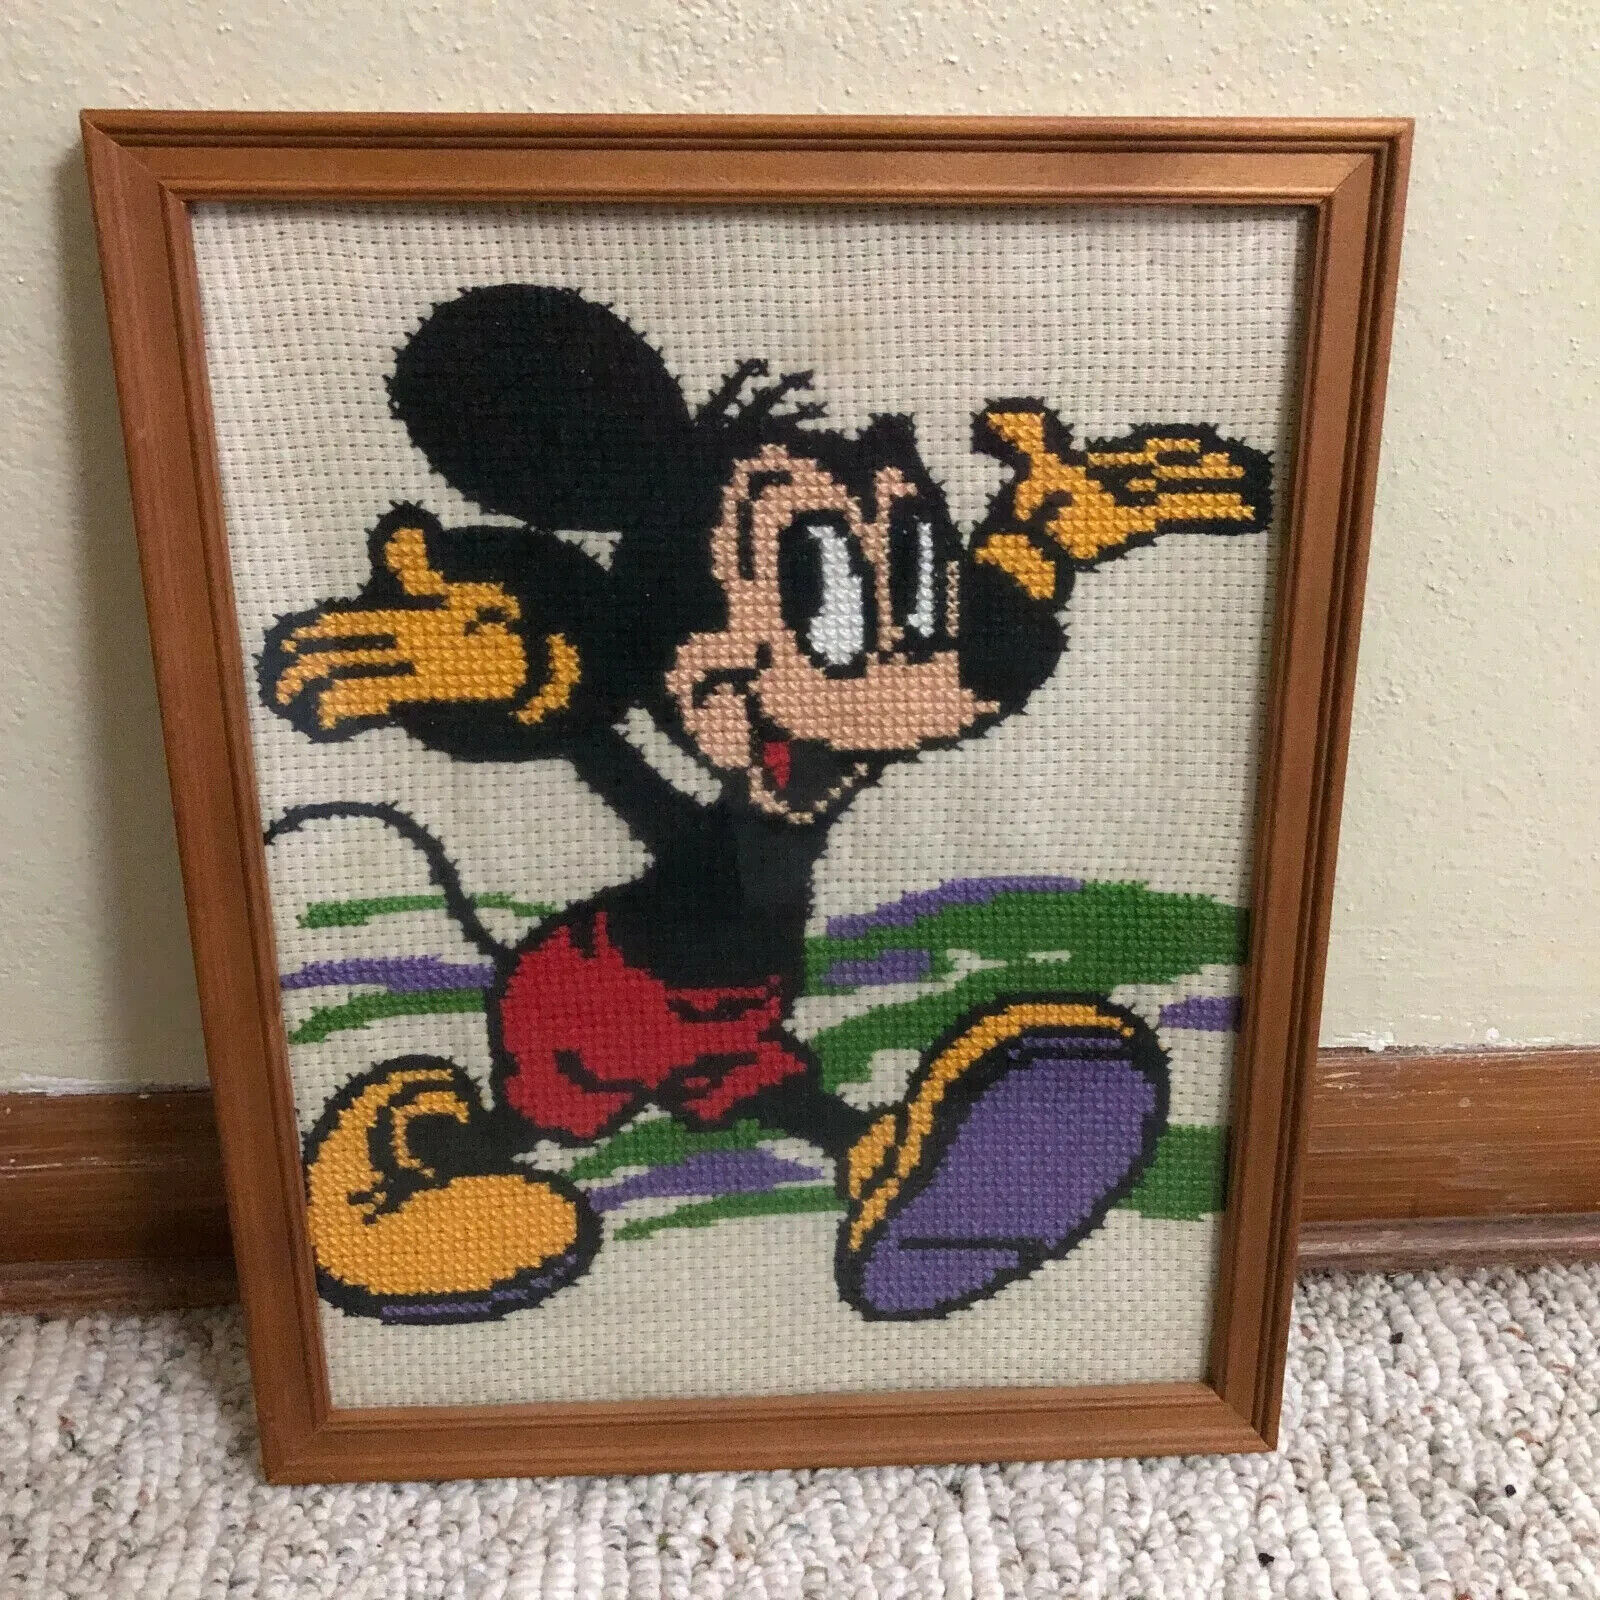 Mickey Mouse Needlepoint Framed Wall Art Colorful Home Made Handmade Vintage